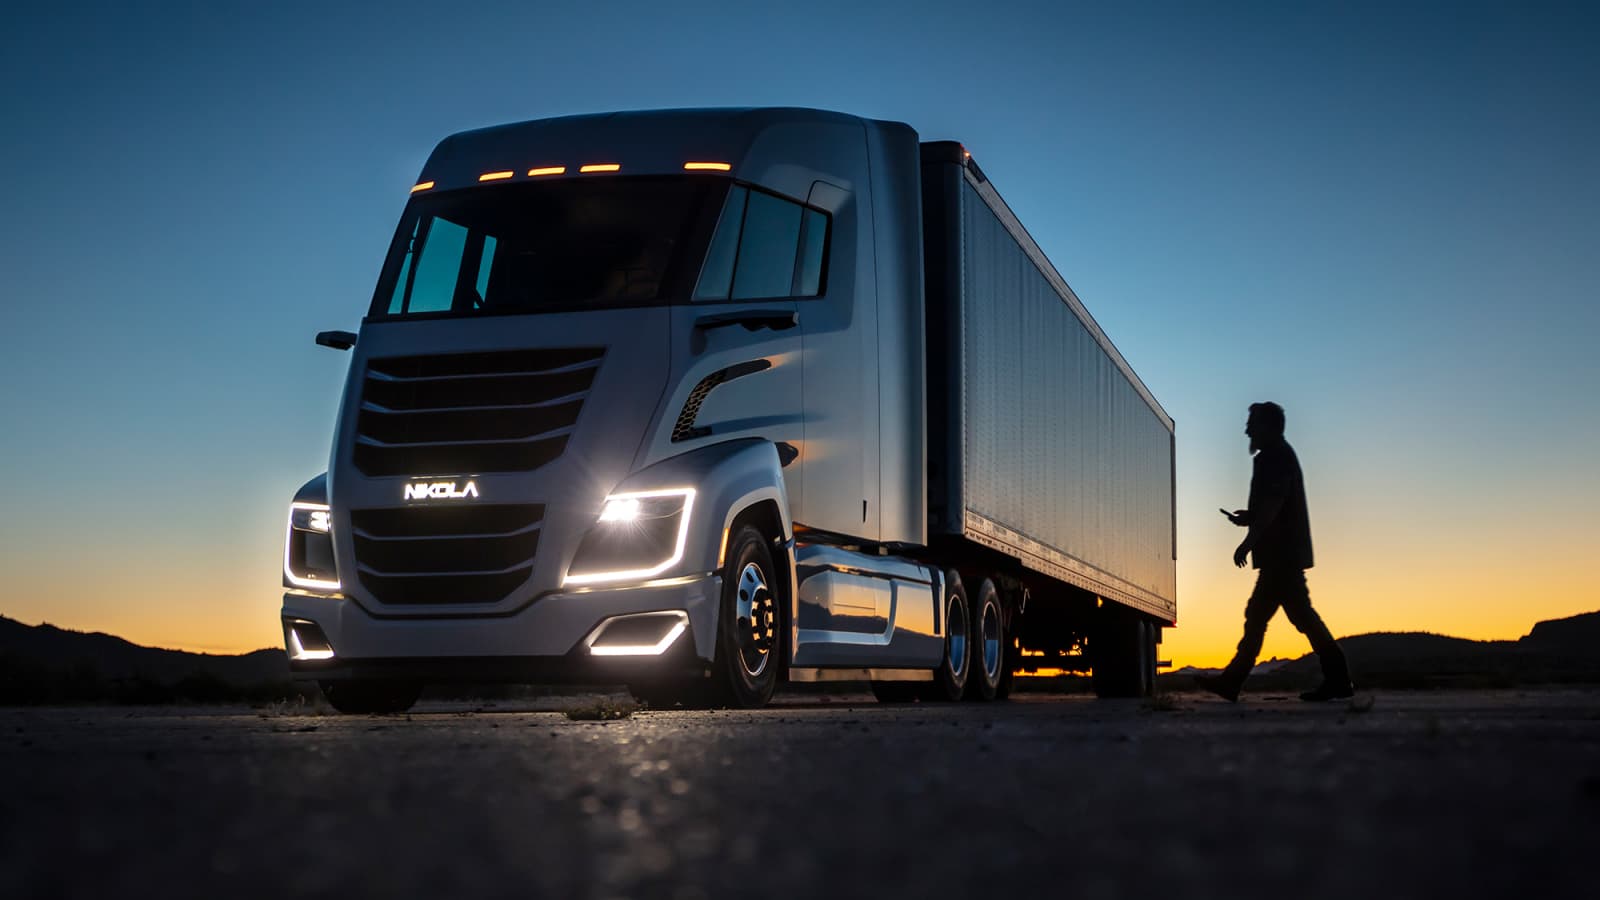 Nikola stock sees another ugly selloff as insider lockup period expires